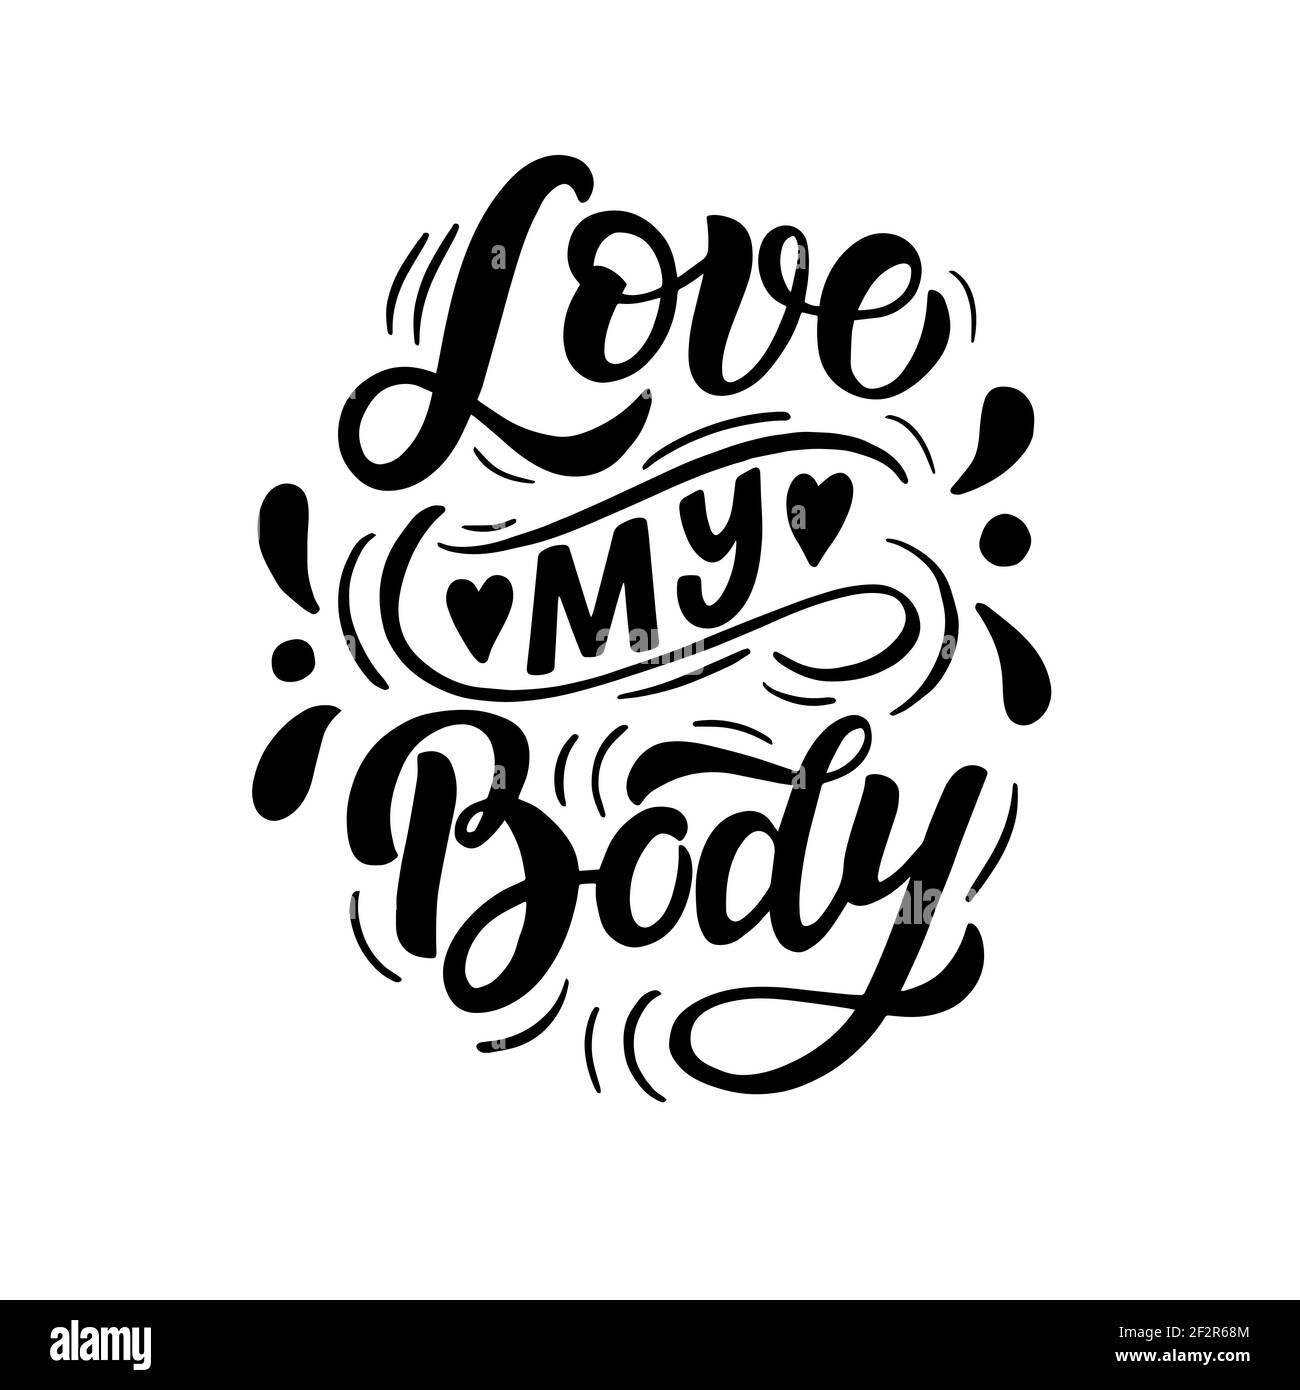 Lettering composition - love my body, in vector graphics, black